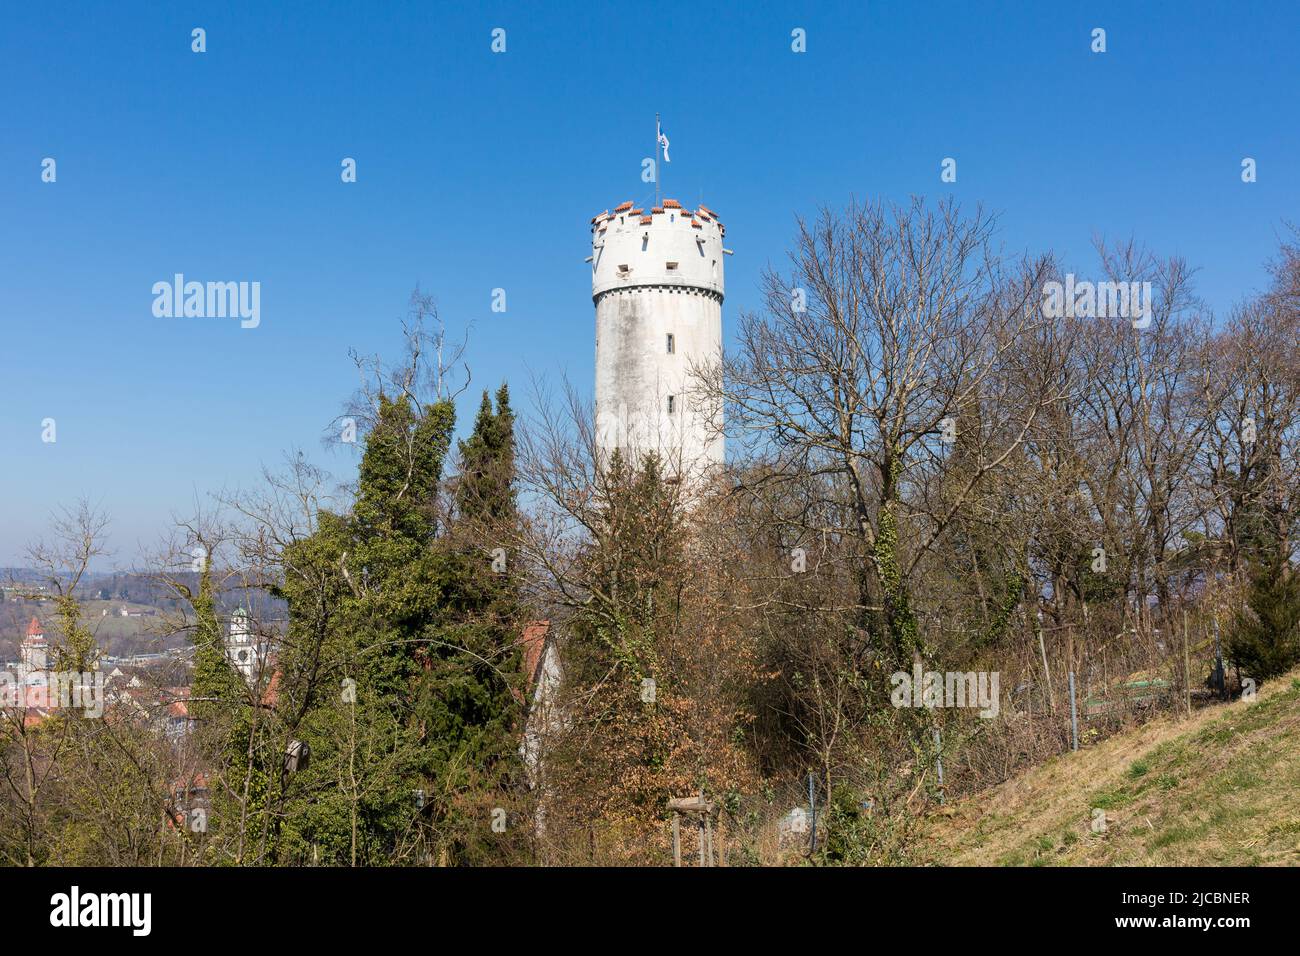 Ravensburg, Germany - Mar 23, 2022: View on the 'Mehlsack' - landmark and most famous tower of Ravensburg. Stock Photo